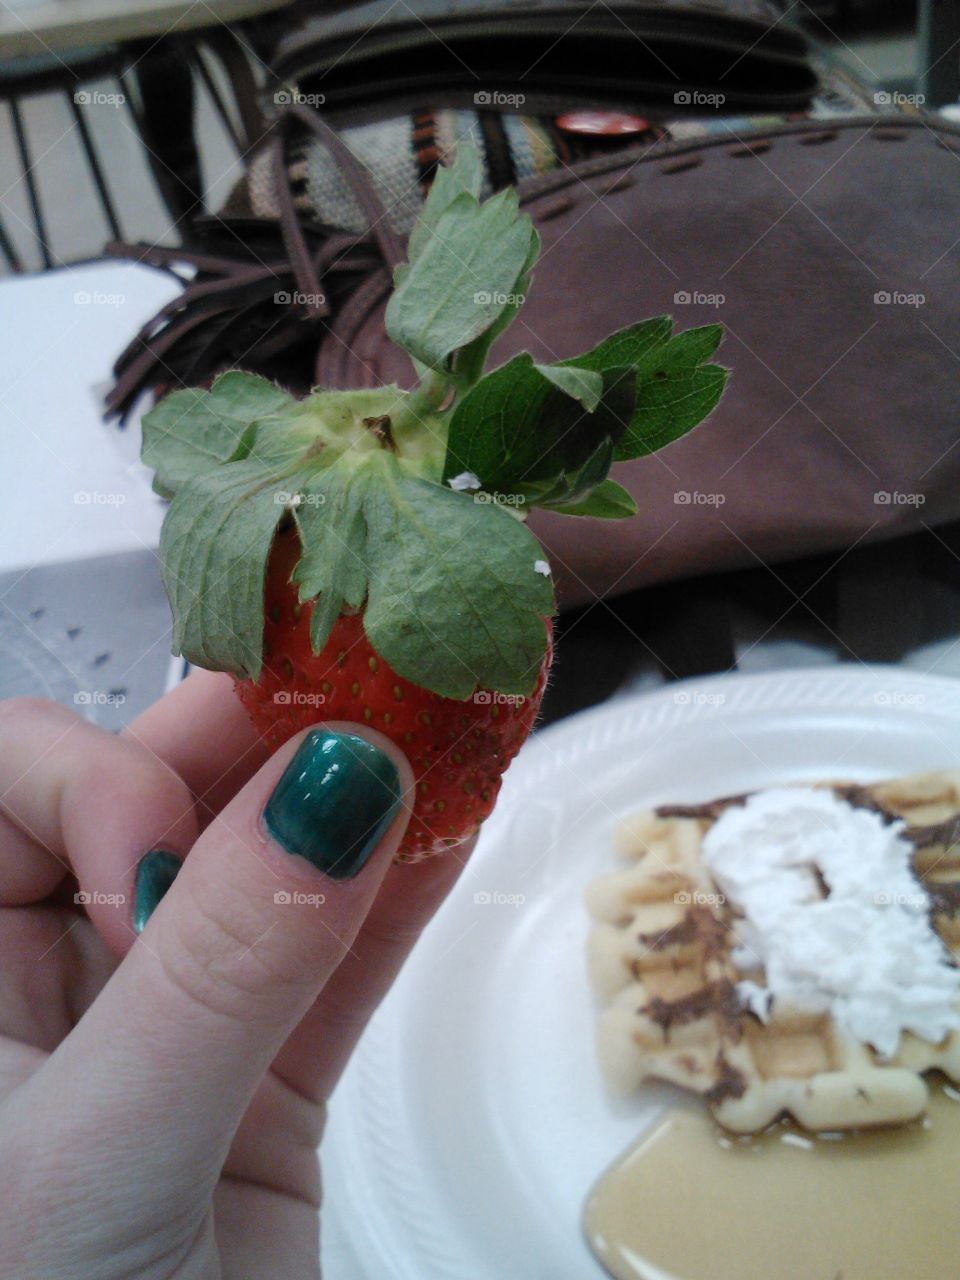 Once upon a time there was a strawberry. 